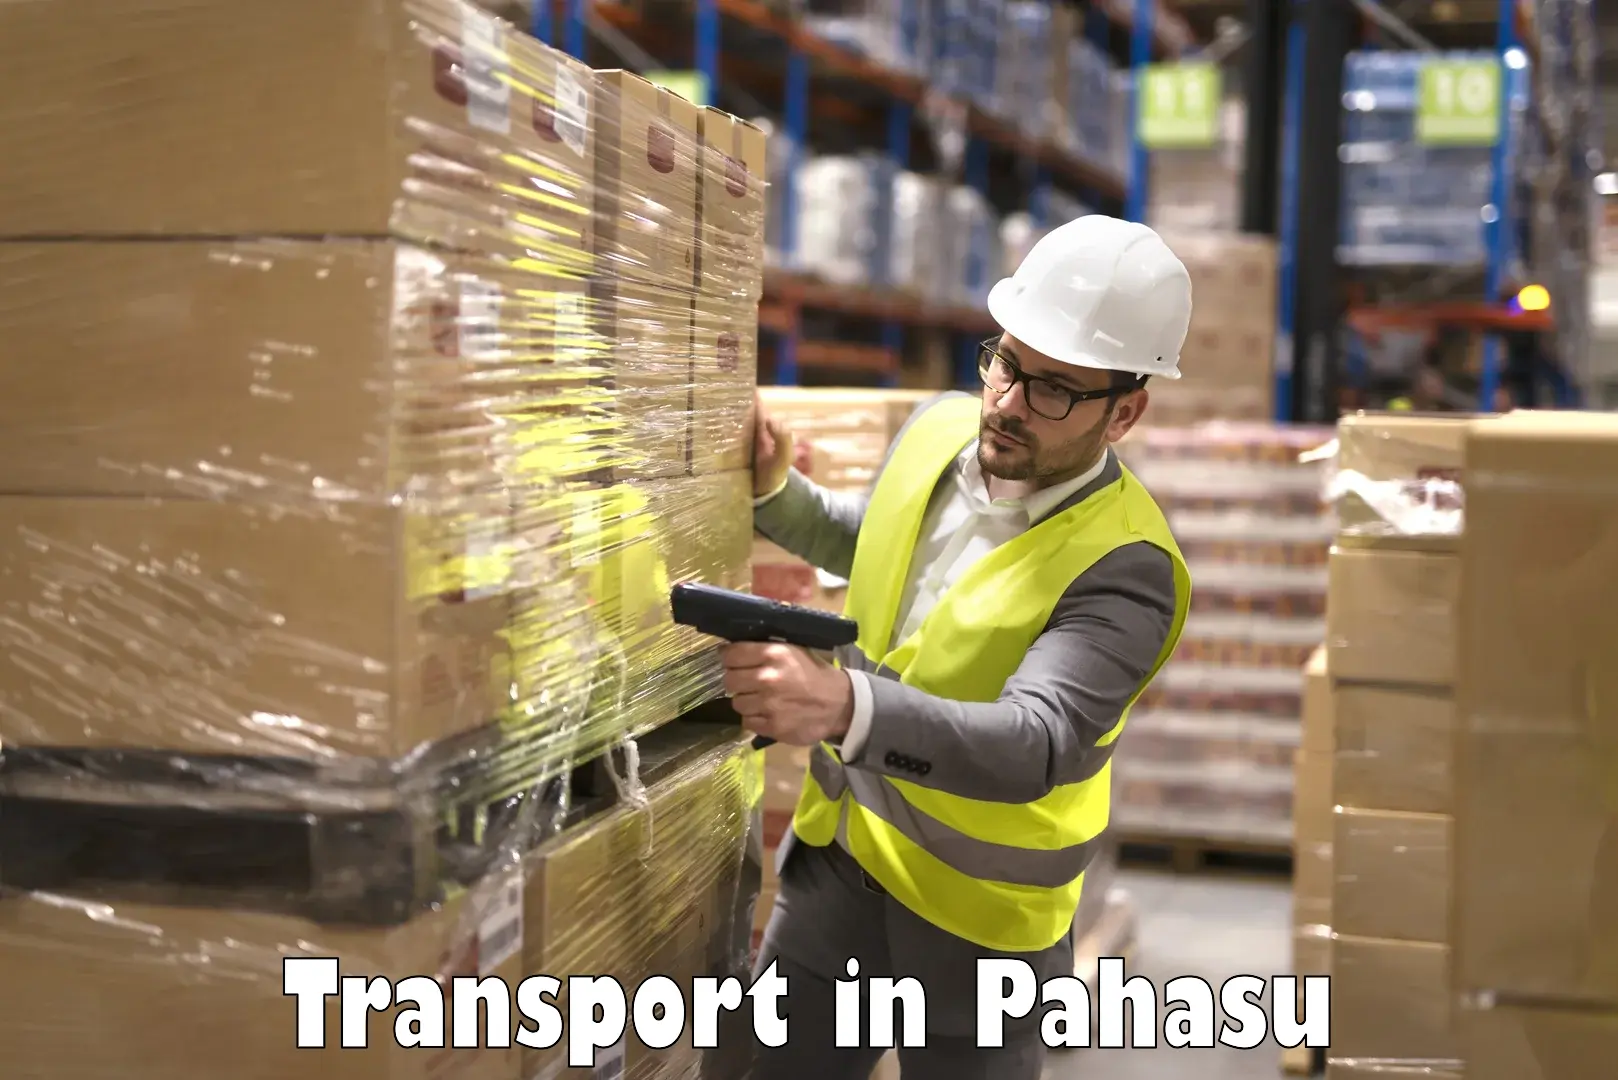 Transport shared services in Pahasu